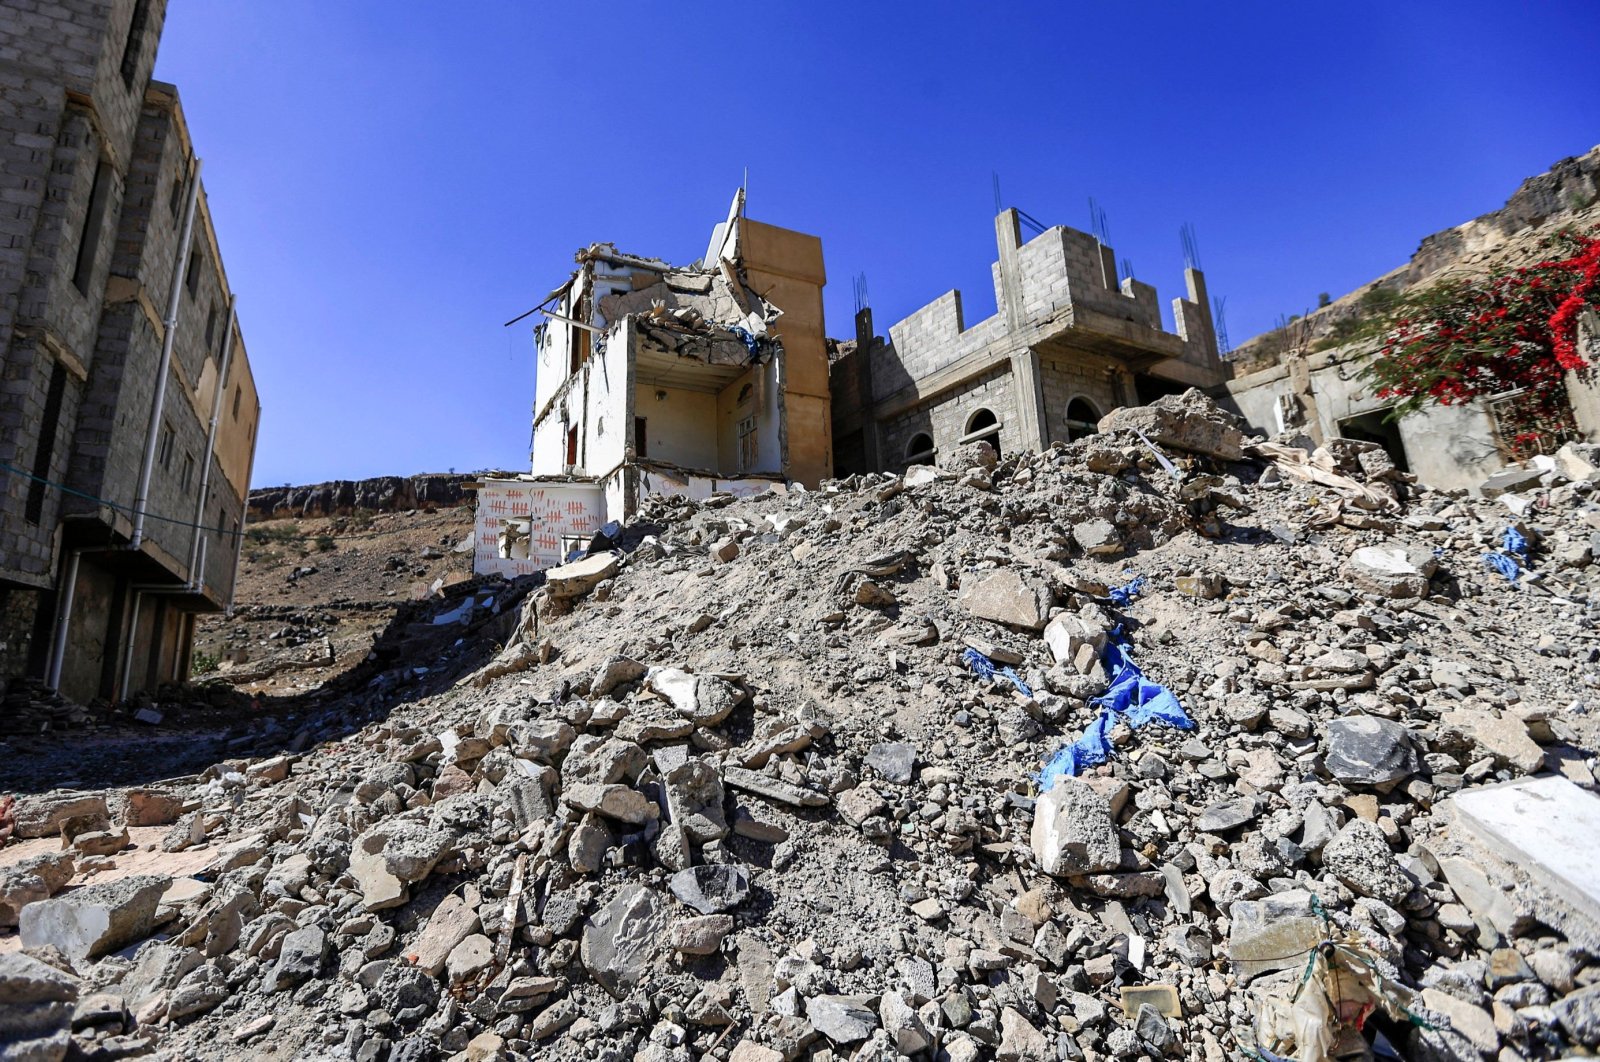 A view of the rubble at the former house of Yemeni girl Buthaina al-Rimi, whose home was destroyed by an 2017 airstrike in the capital Sanaa, killing all her family members and injuring her face, Yemen, Dec. 27, 2018. (AFP Photo)